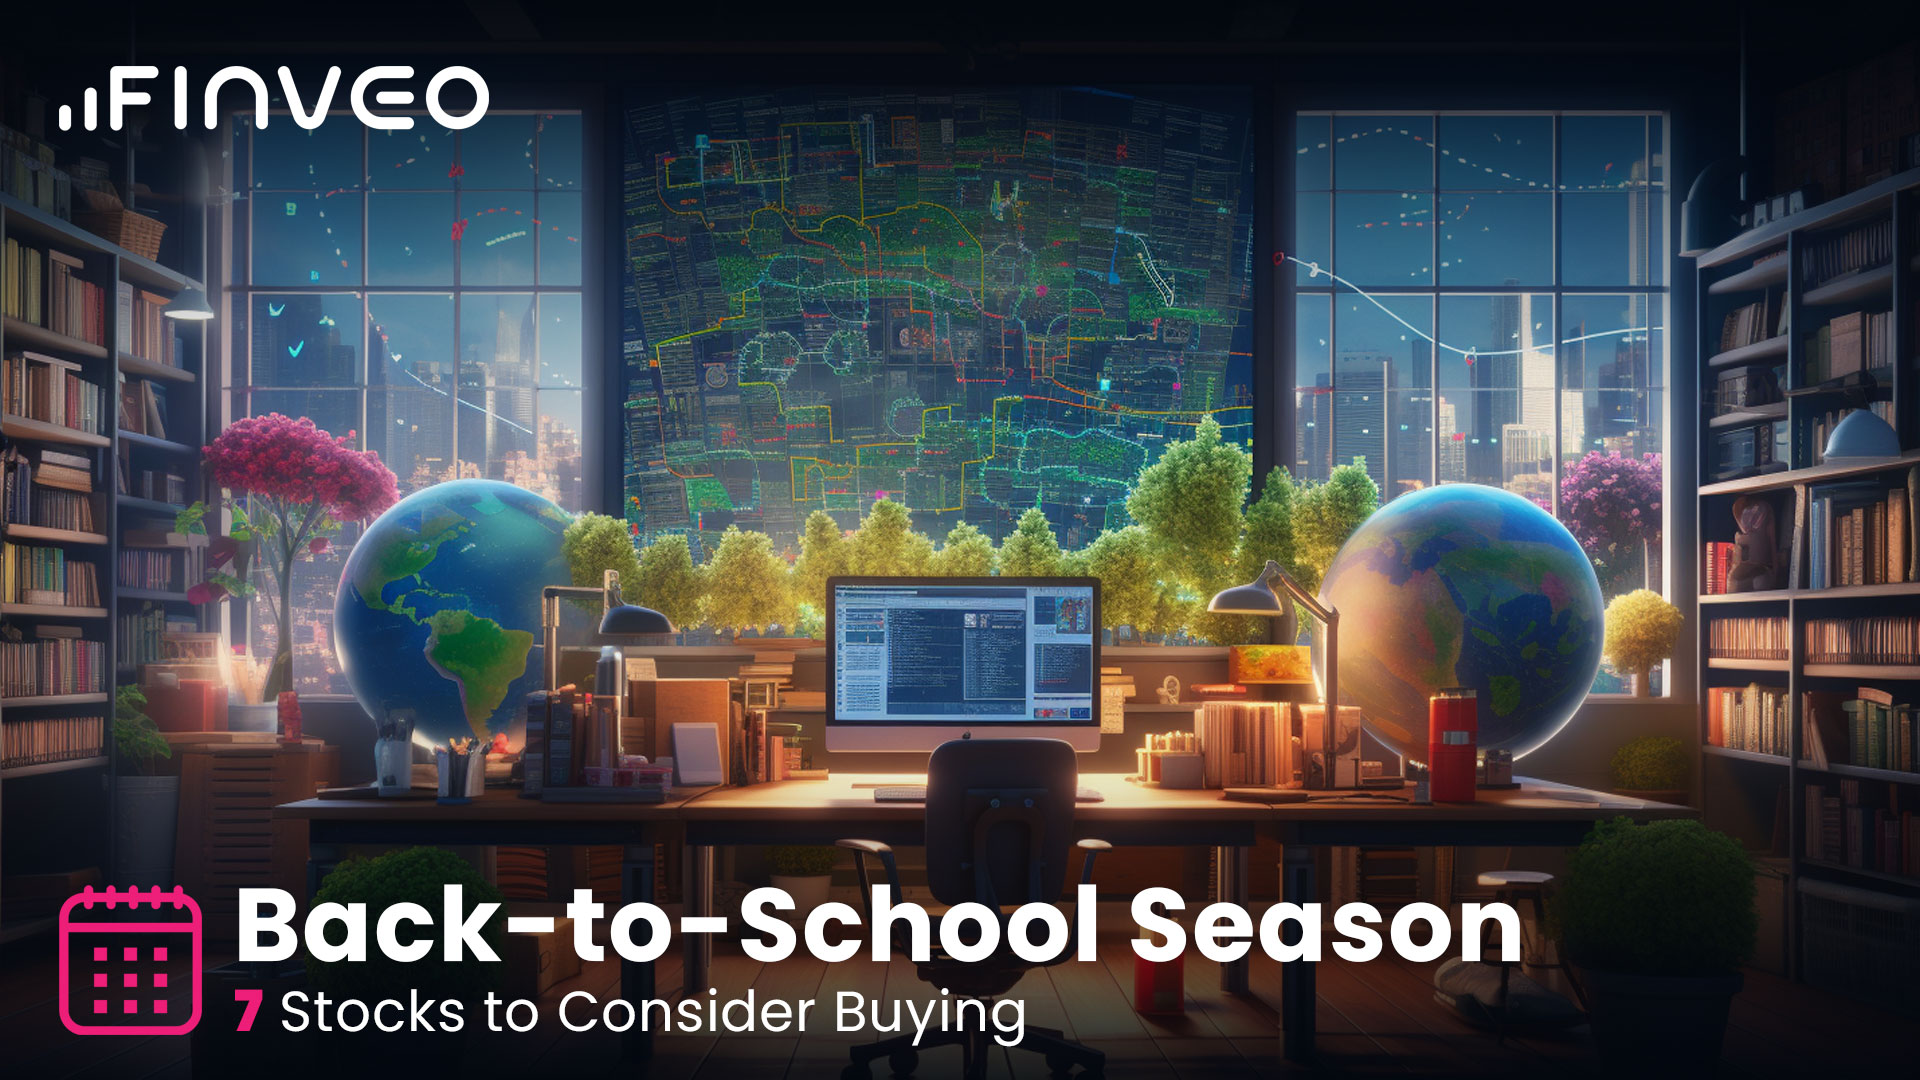 Back-to-School Season: A Smart Investment Opportunity with 7 Stocks to Consider Buying